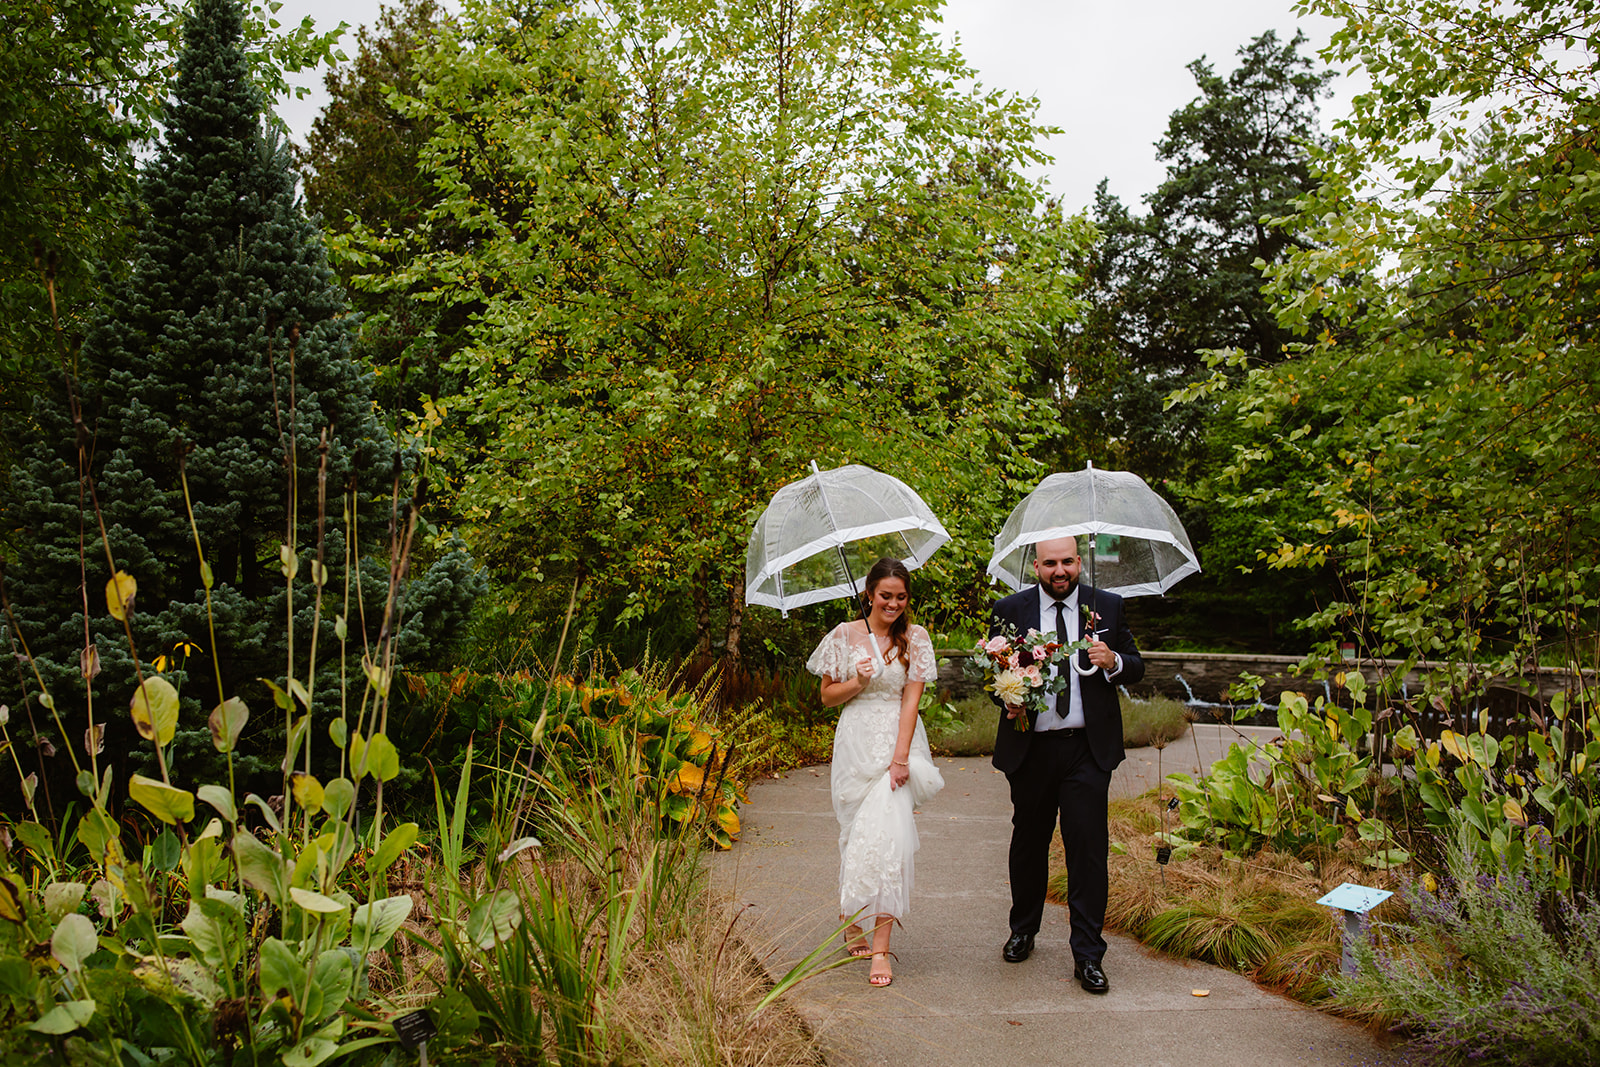 What to Do if It Rains on Your Wedding Day